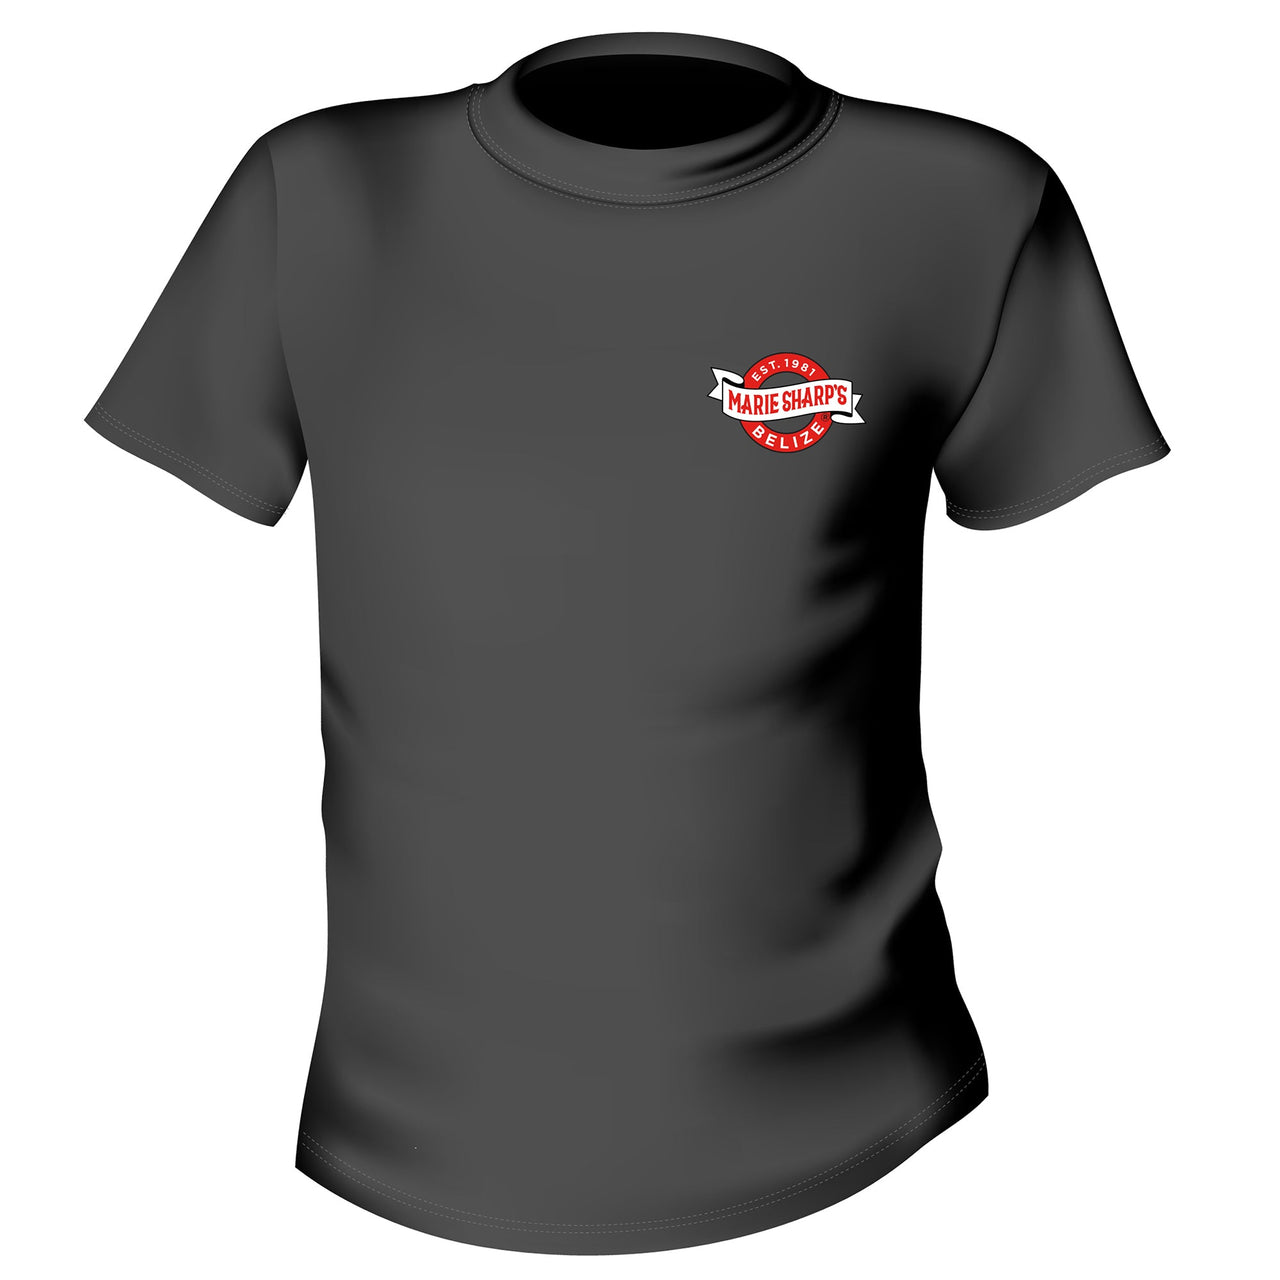 Marie Sharp's T-Shirt - If You Can't Take the Heat - Unisex - Marie Sharp's Company Store